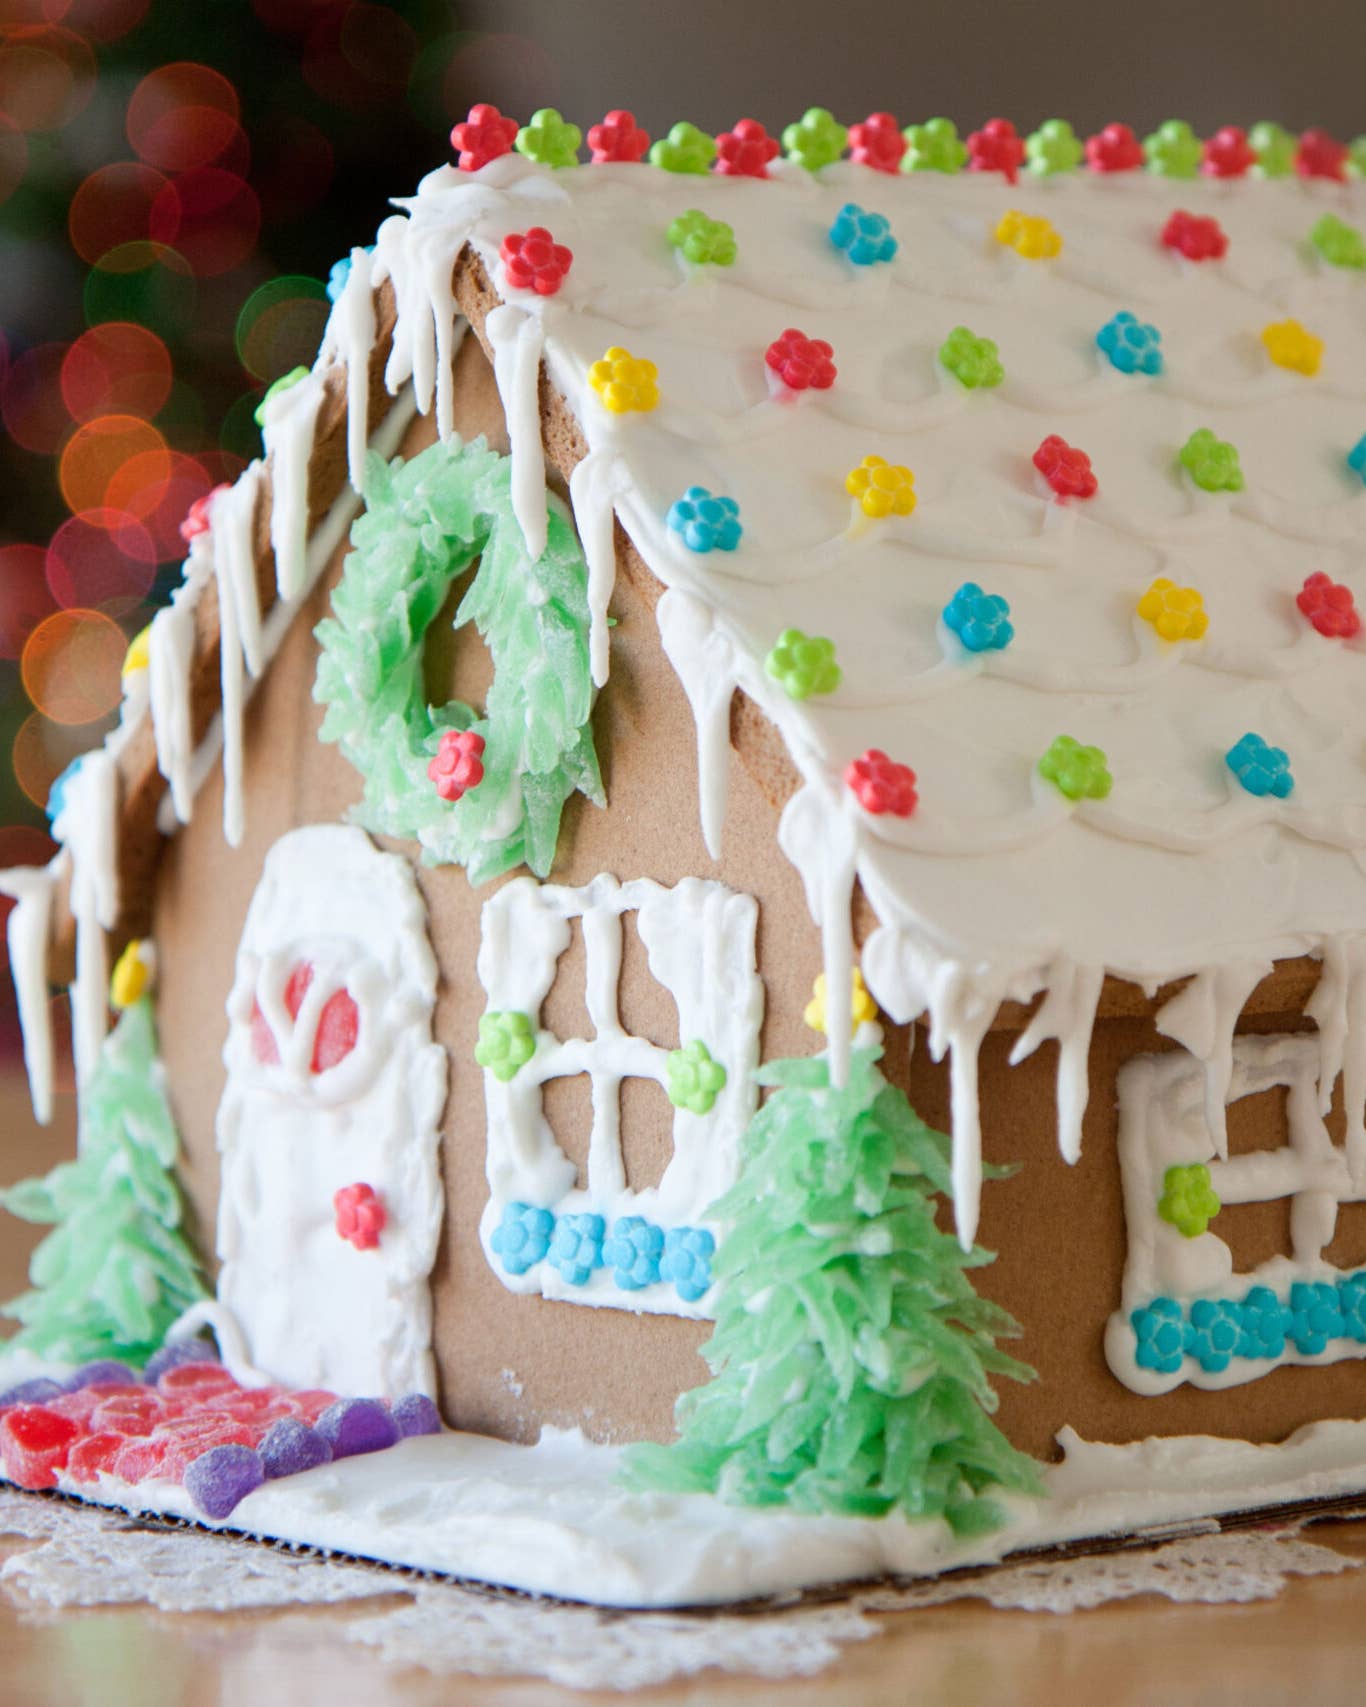 The Best Gingerbread House Kits Make a Sweet Centerpiece for Your Holiday Table